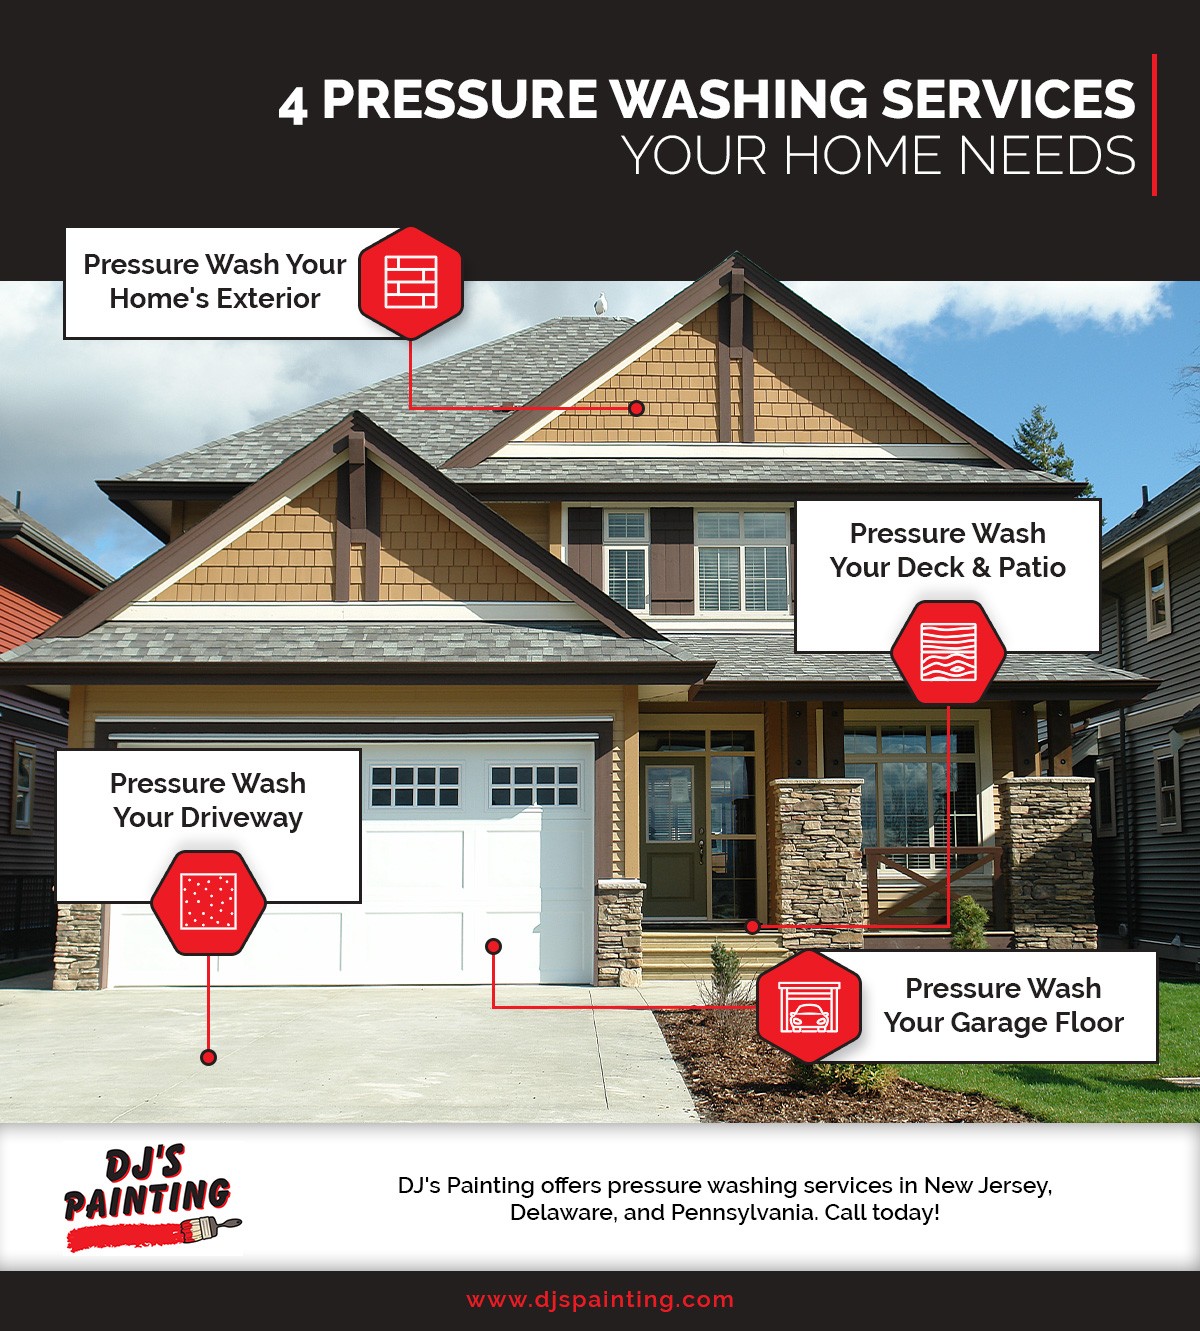 M7473 - DJs Painting_4 Pressure Washing Services Your Home Needs_Infographic